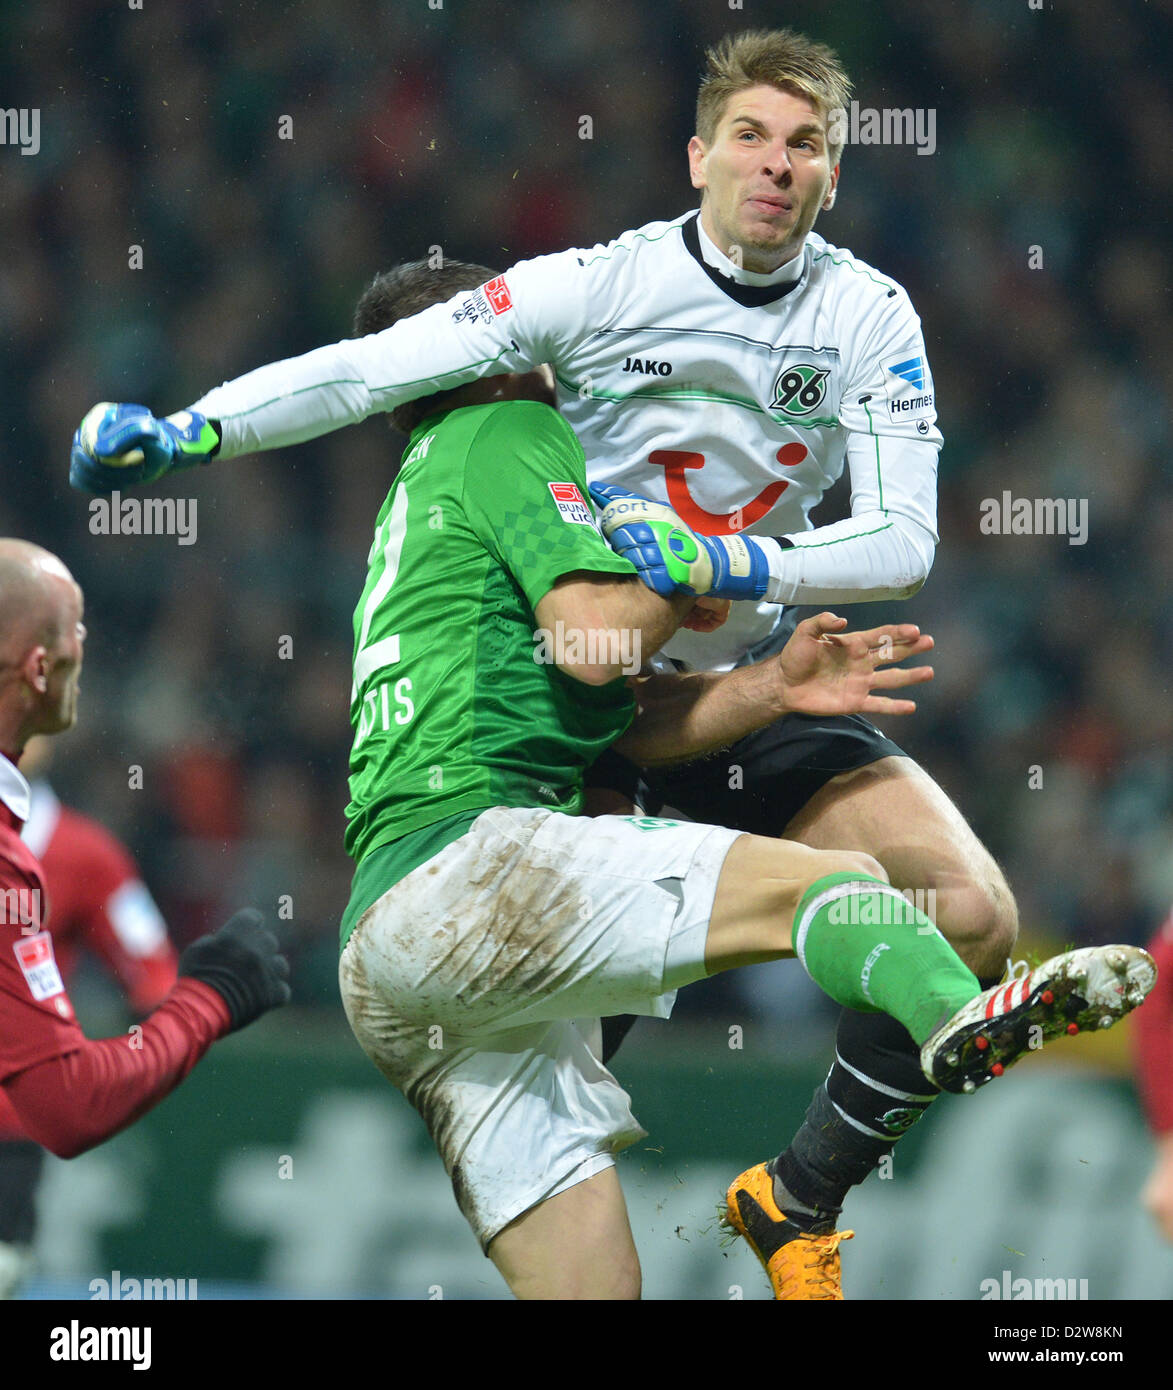 Werder's Sokrates (L) vies for the ball wth Hannover's goalkeeper Ron-Robert Zieler during the Bundesliga soccer match between Werder Bremen and Hannover 96 at Weser Stadium in Bremen, Germany, 01 February 2013. Photo: Carmen Jaspersen Stock Photo